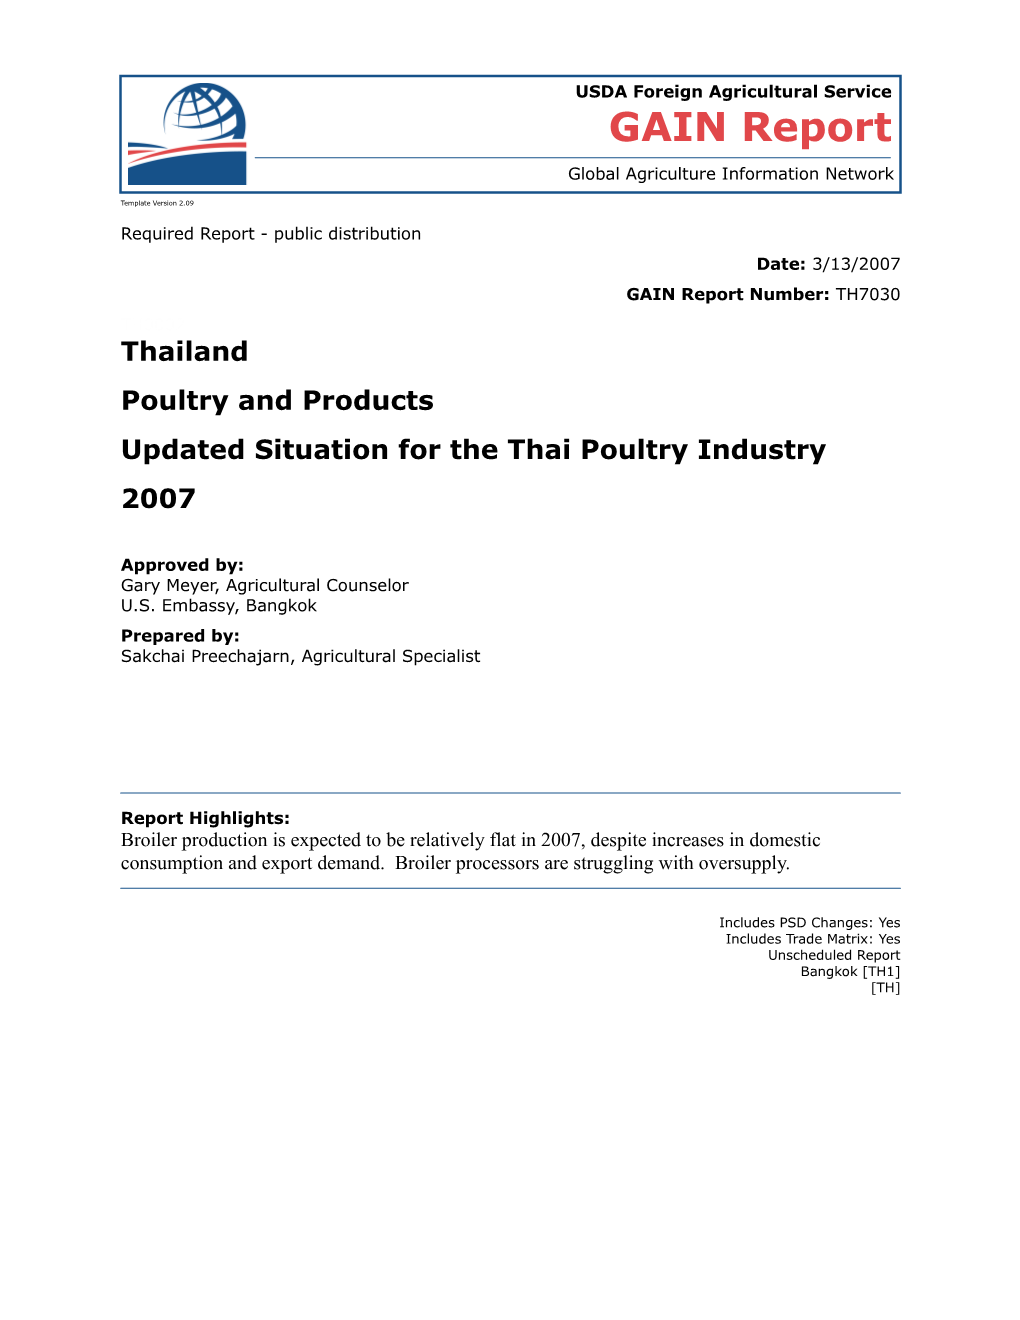 Updated Situation for the Thai Poultry Industry